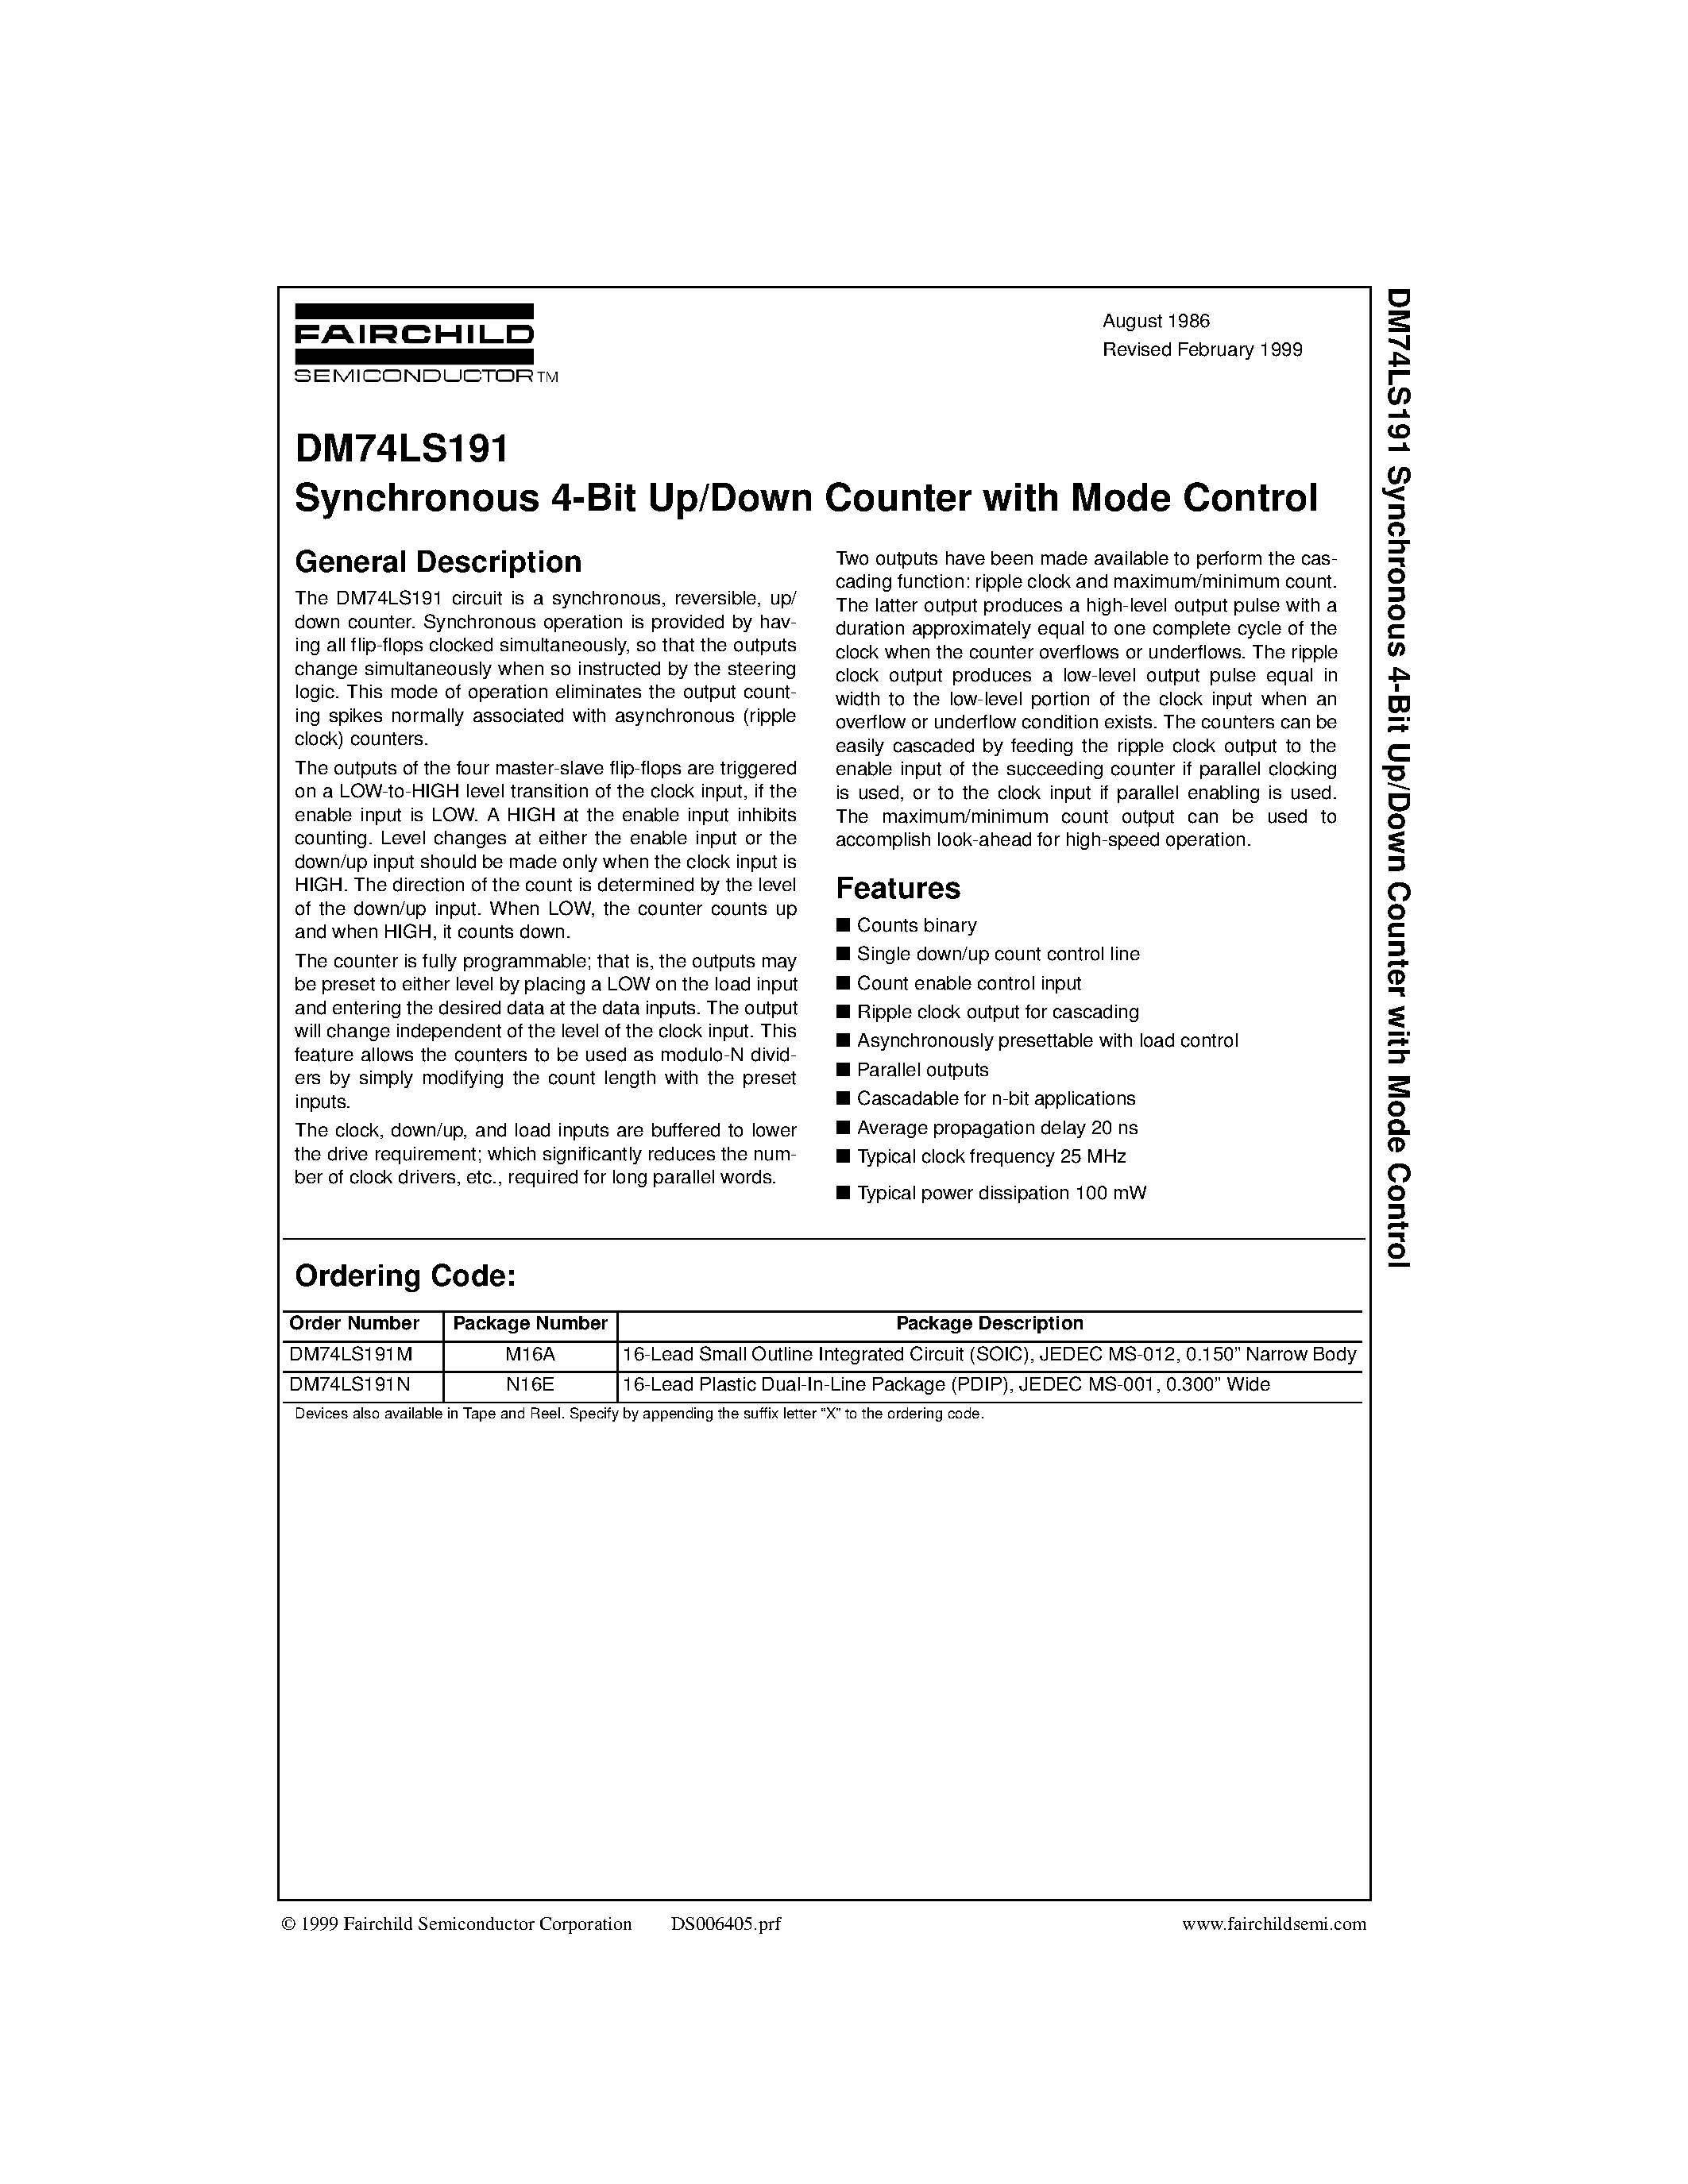 Datasheet 74191 - Synchronous 4-Bit Up/Down Counter with Mode Control page 1